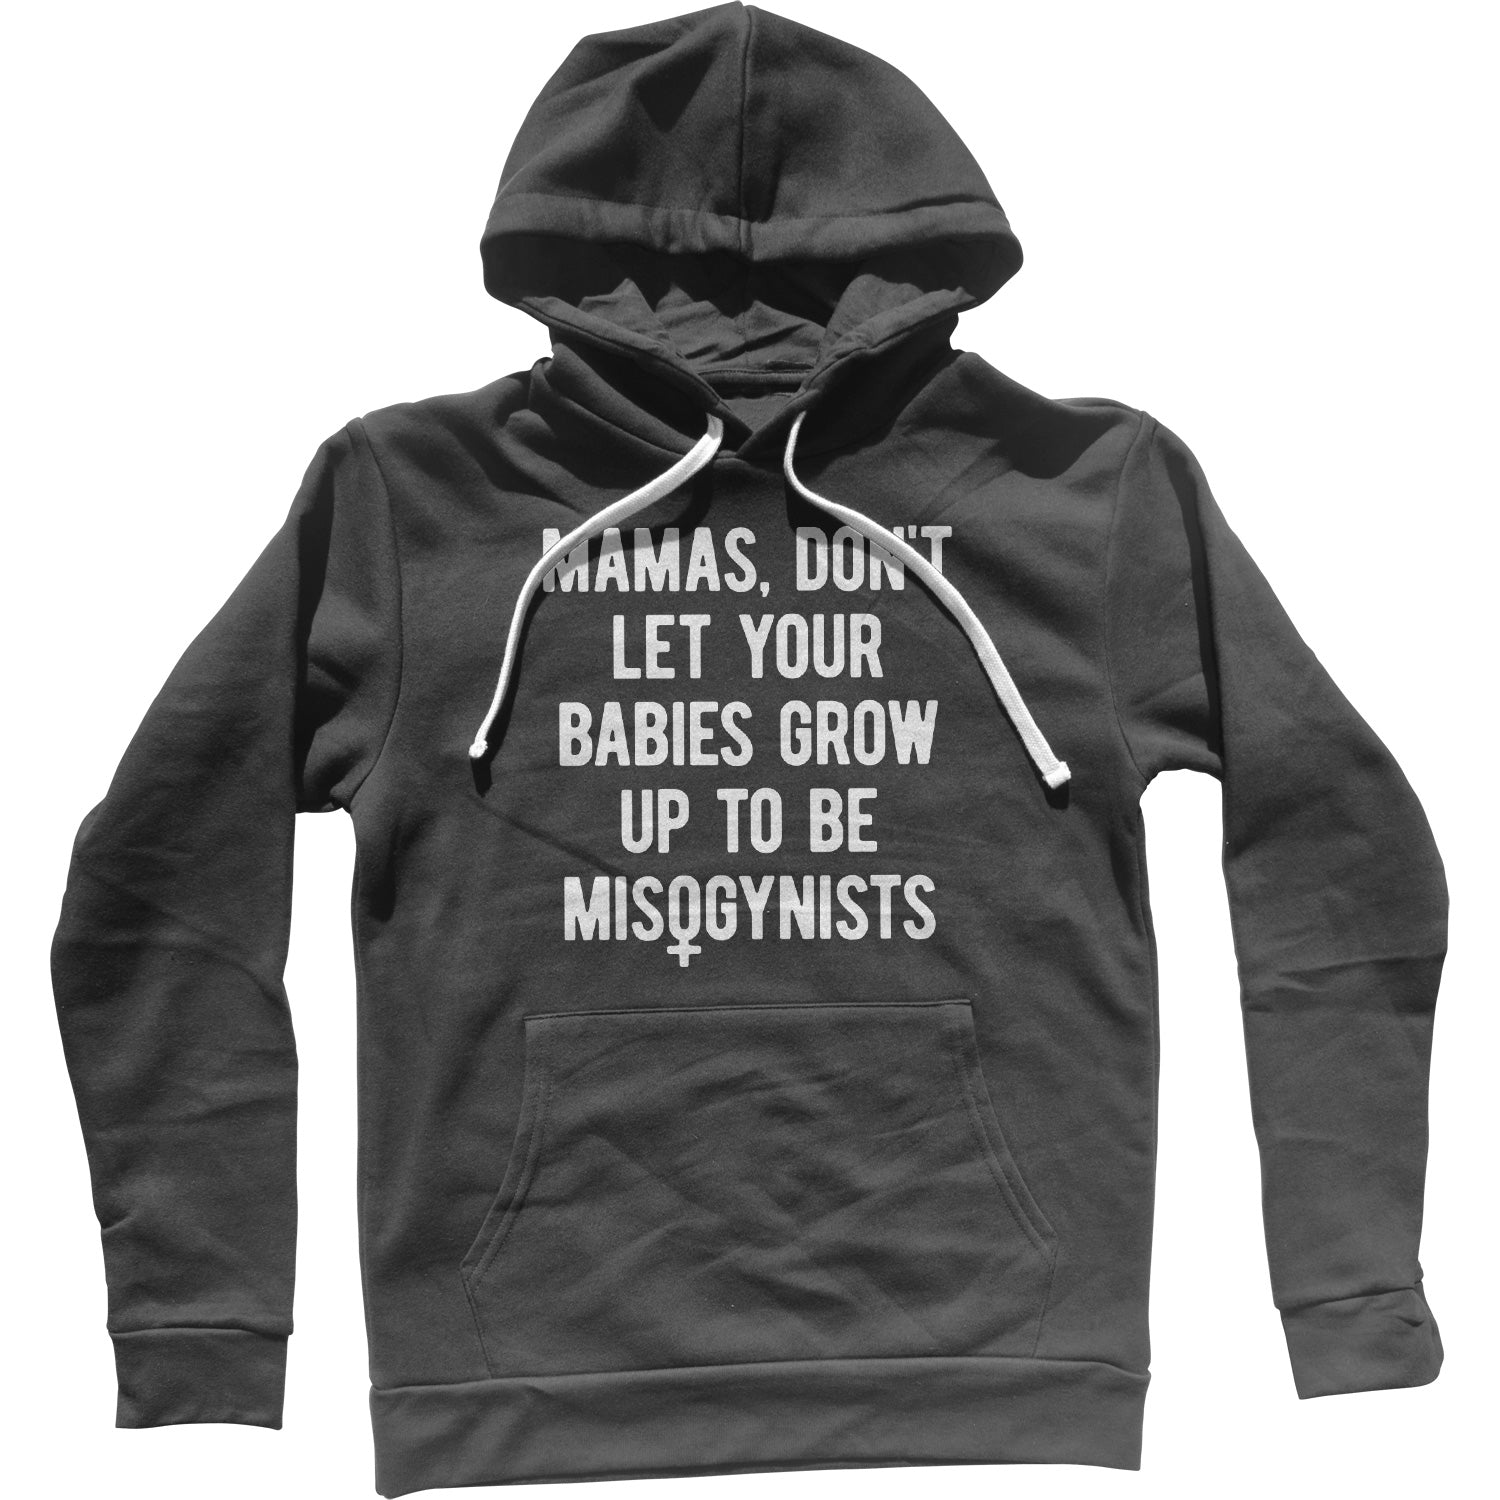 Mamas Don't Let Your Babies Grow Up to be Misogynists Unisex Hoodie